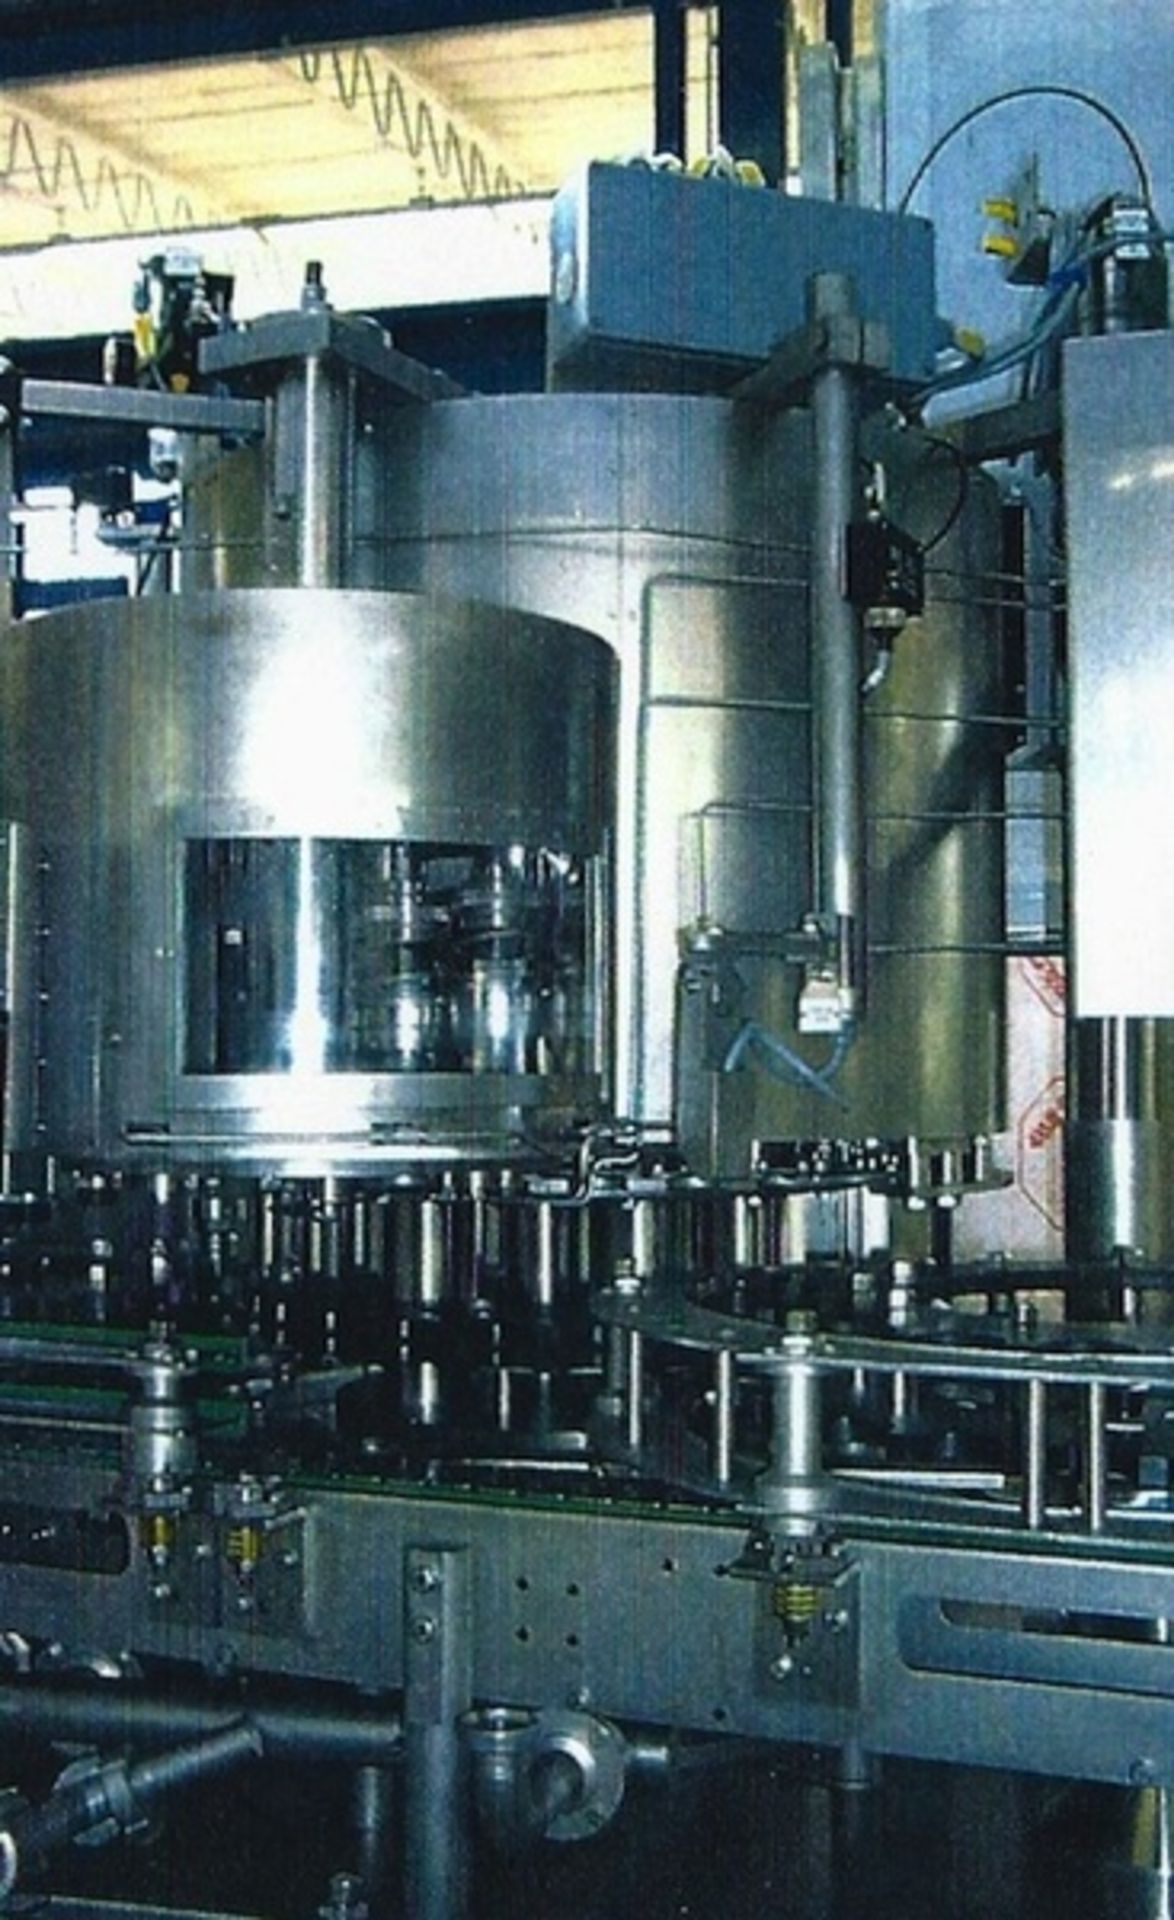 KHS 96 Valve Glass/PET Filler with Alcoa 24 Head Capper, 96 Computer Controlled Filling Valves - Image 7 of 11